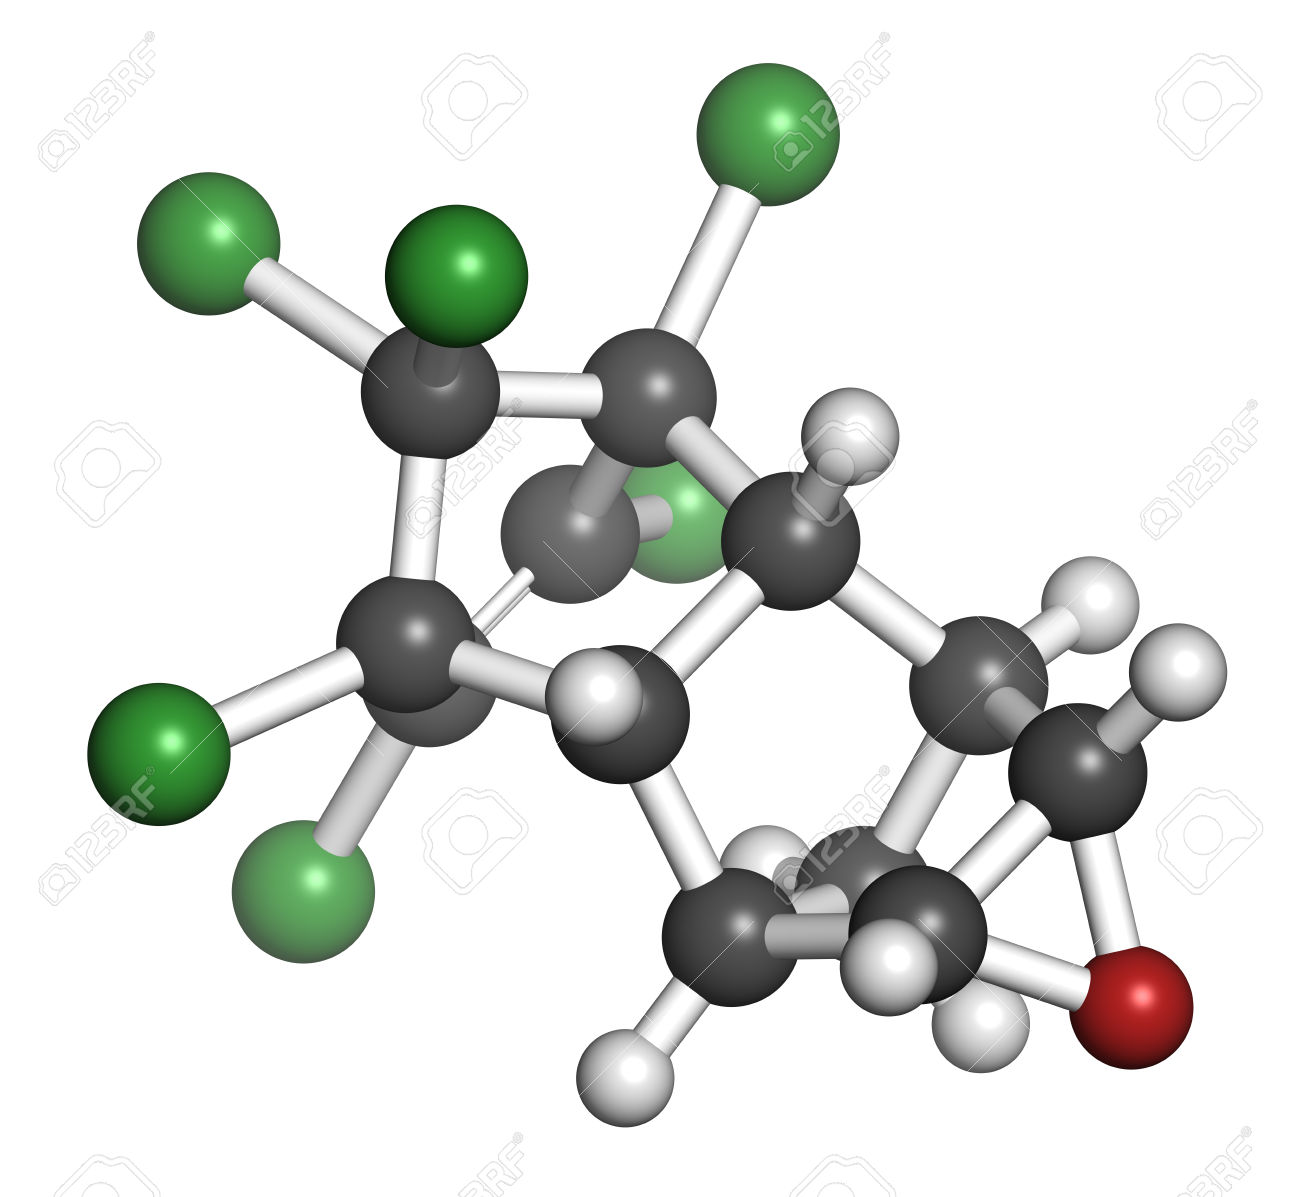 https://www.123rf.com/photo_25356813_dieldrin-pesticide-molecule-insecticide-that-persists-for-very-long-time-in-environment-persistent-o.html